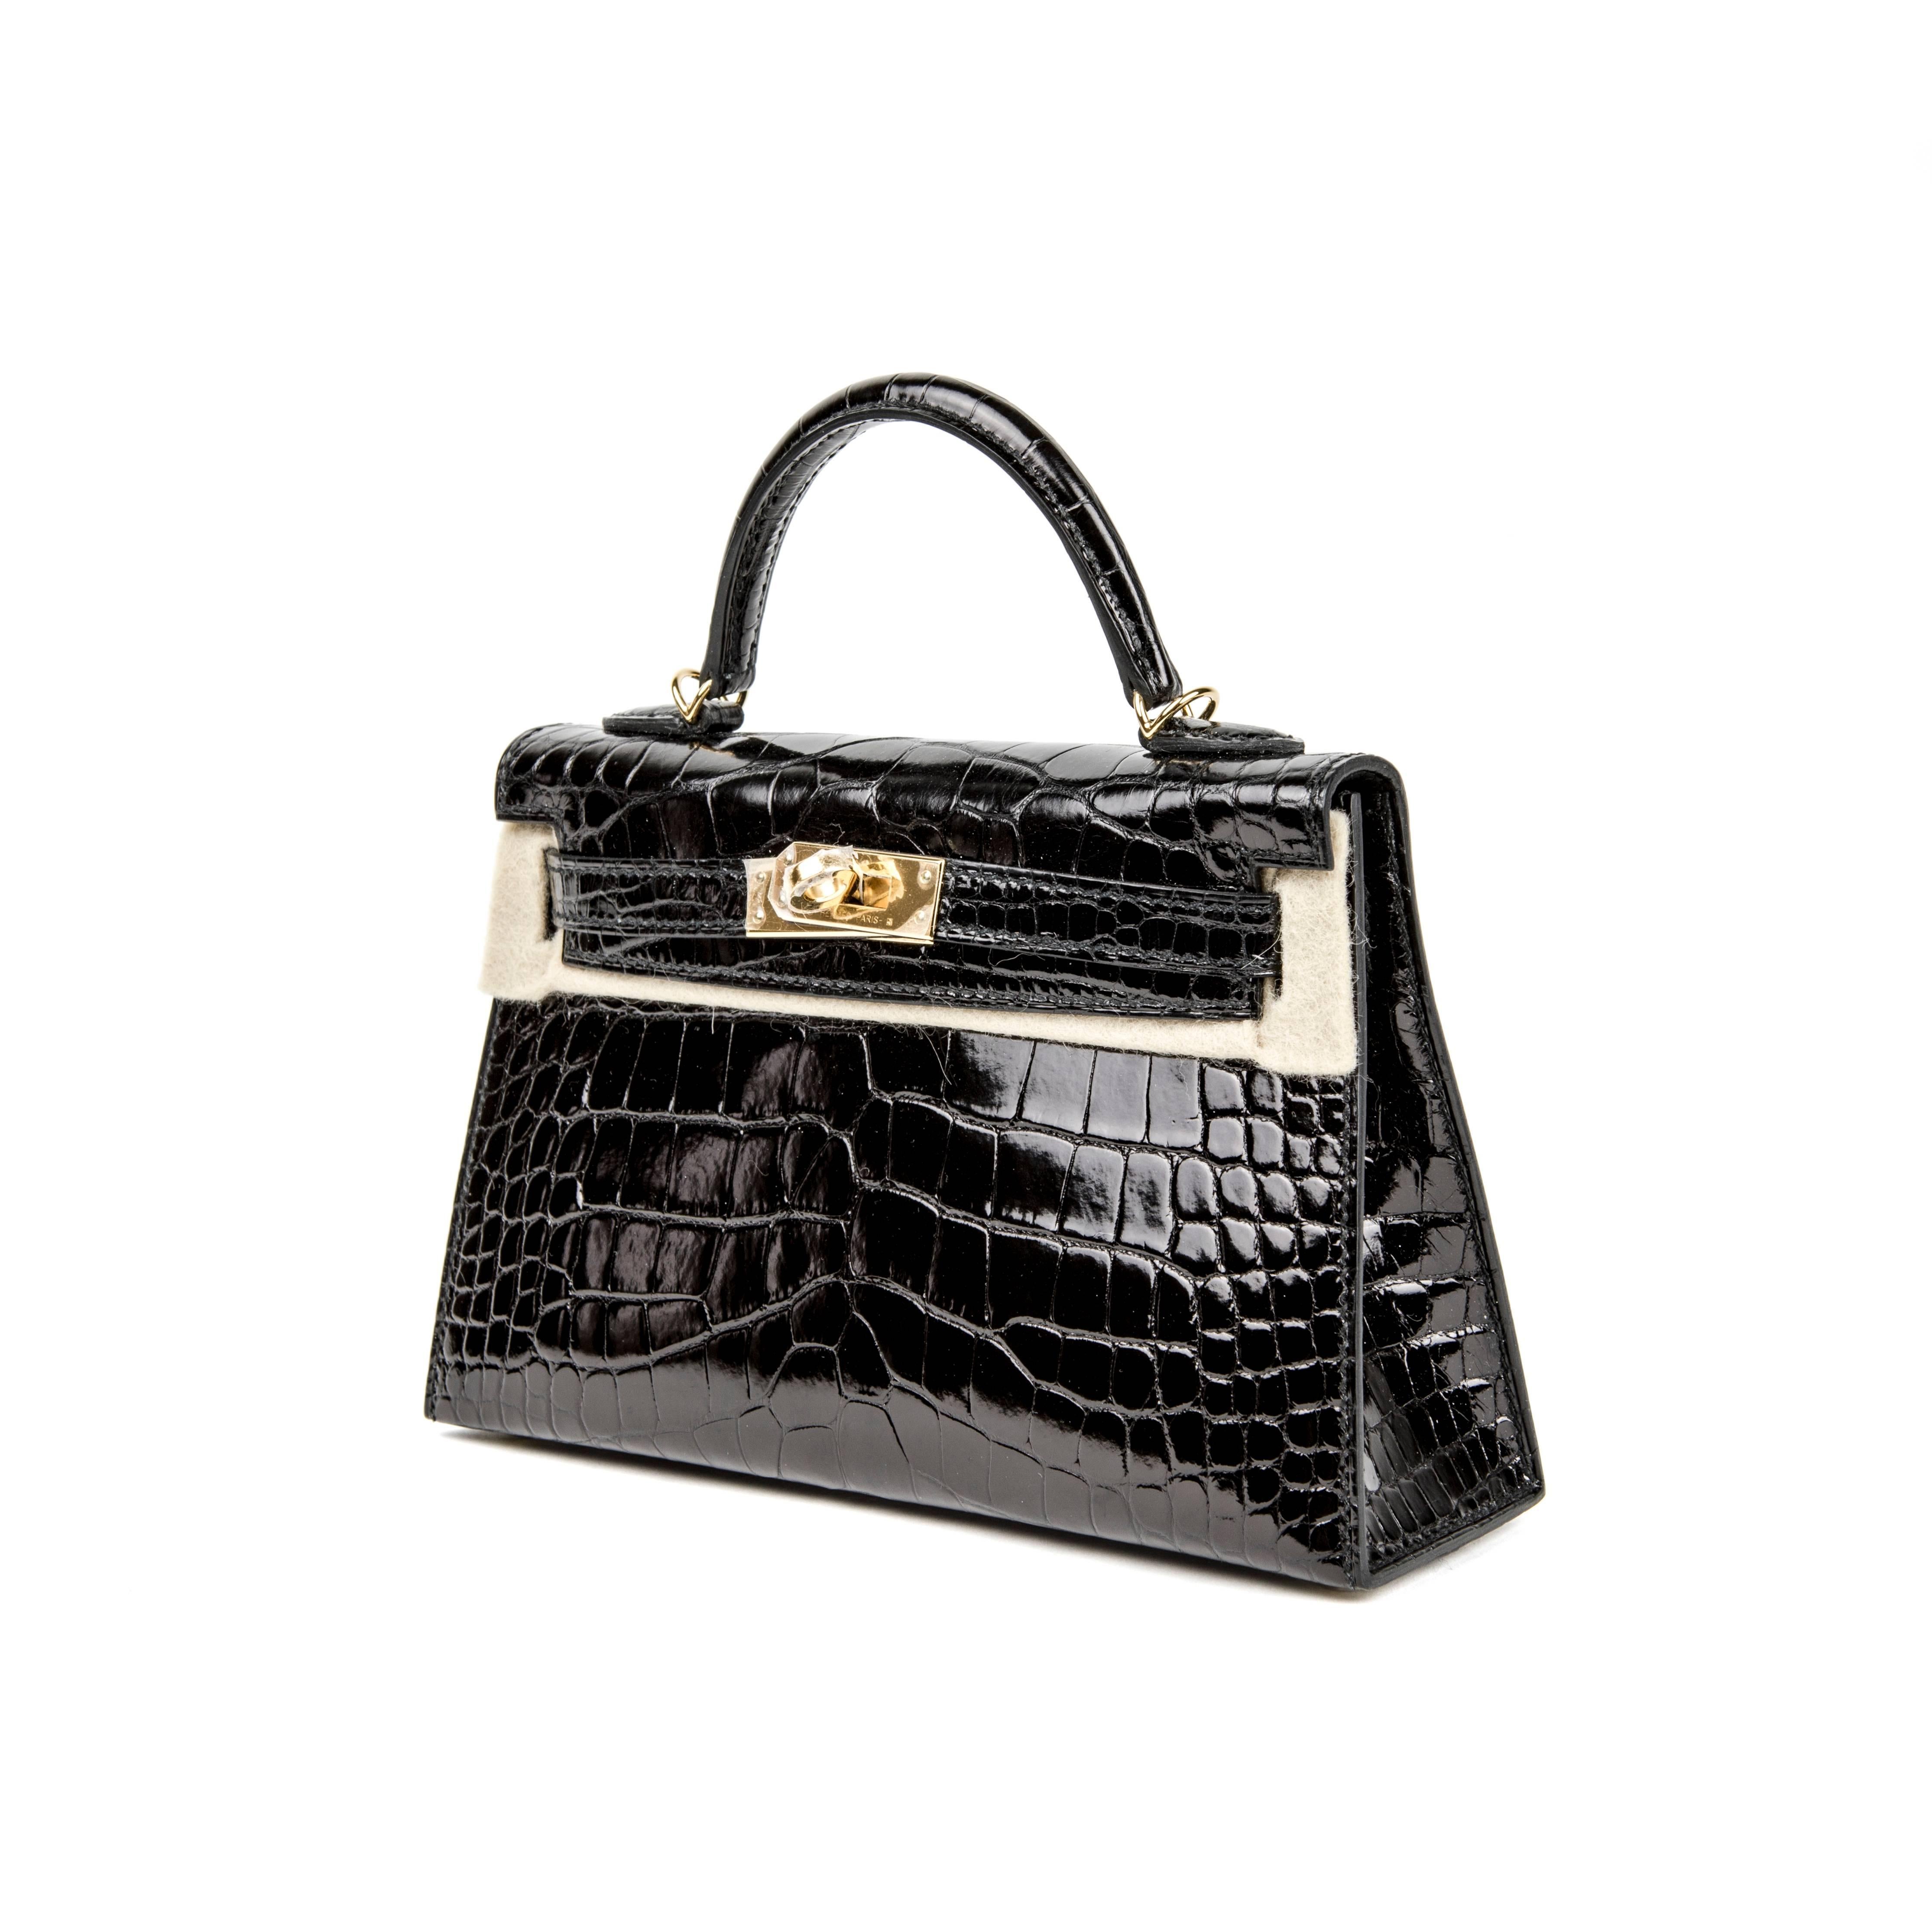 Hermes Kelly 20 Noir (Black) in Croco Leather Gold Hardware (GHW) Stamp A (2017) For Sale 1